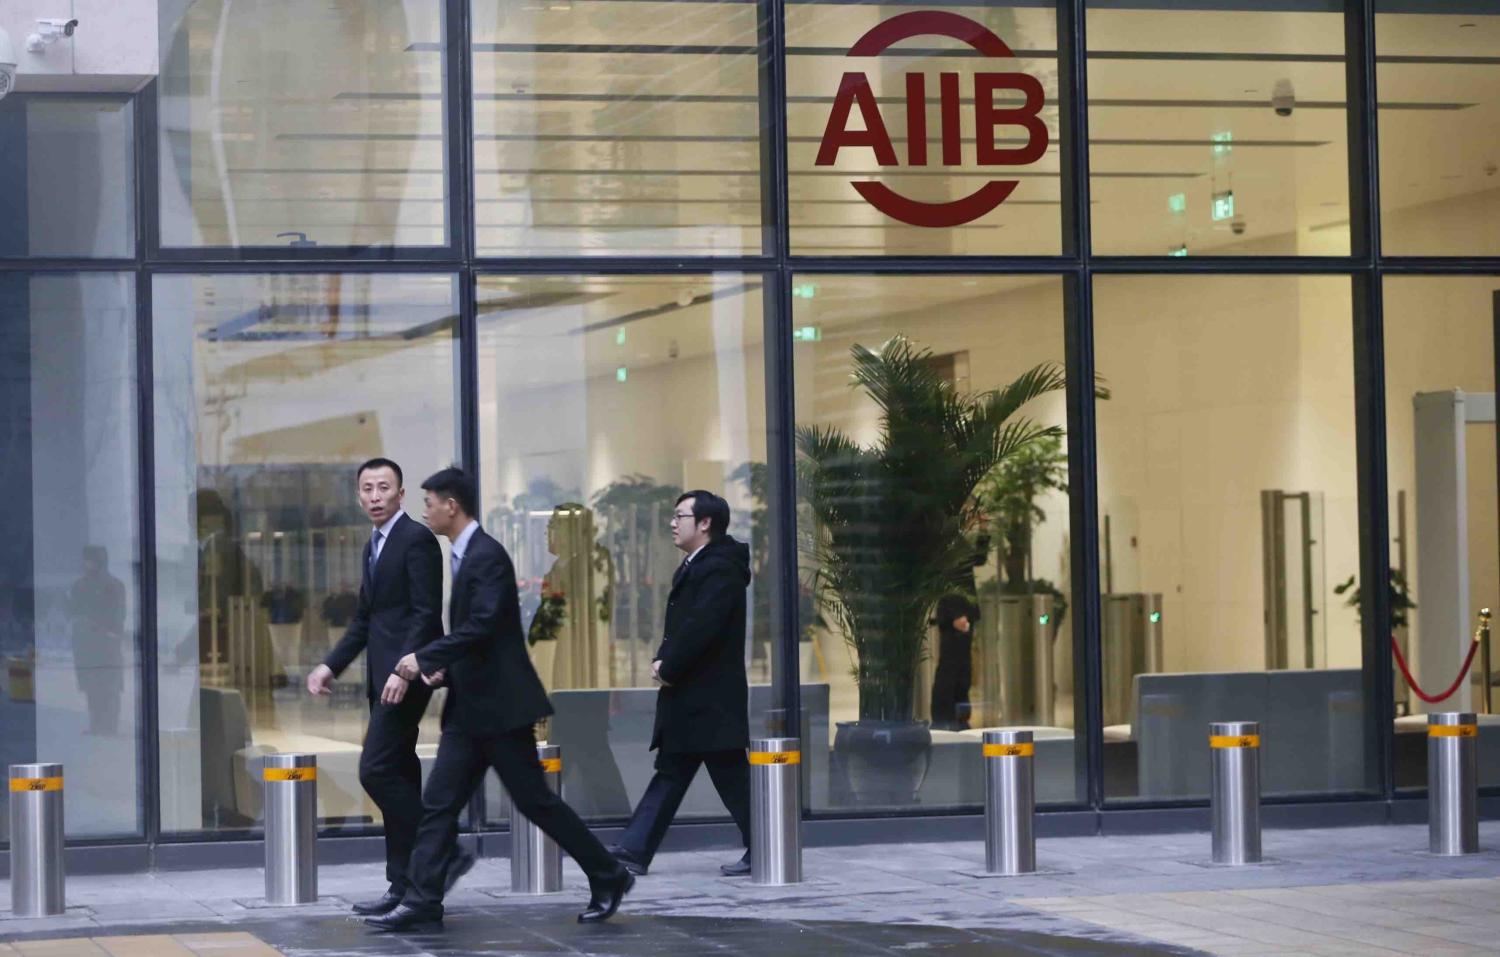 Pakistan To Get $500M For Uplift Program From AIIB